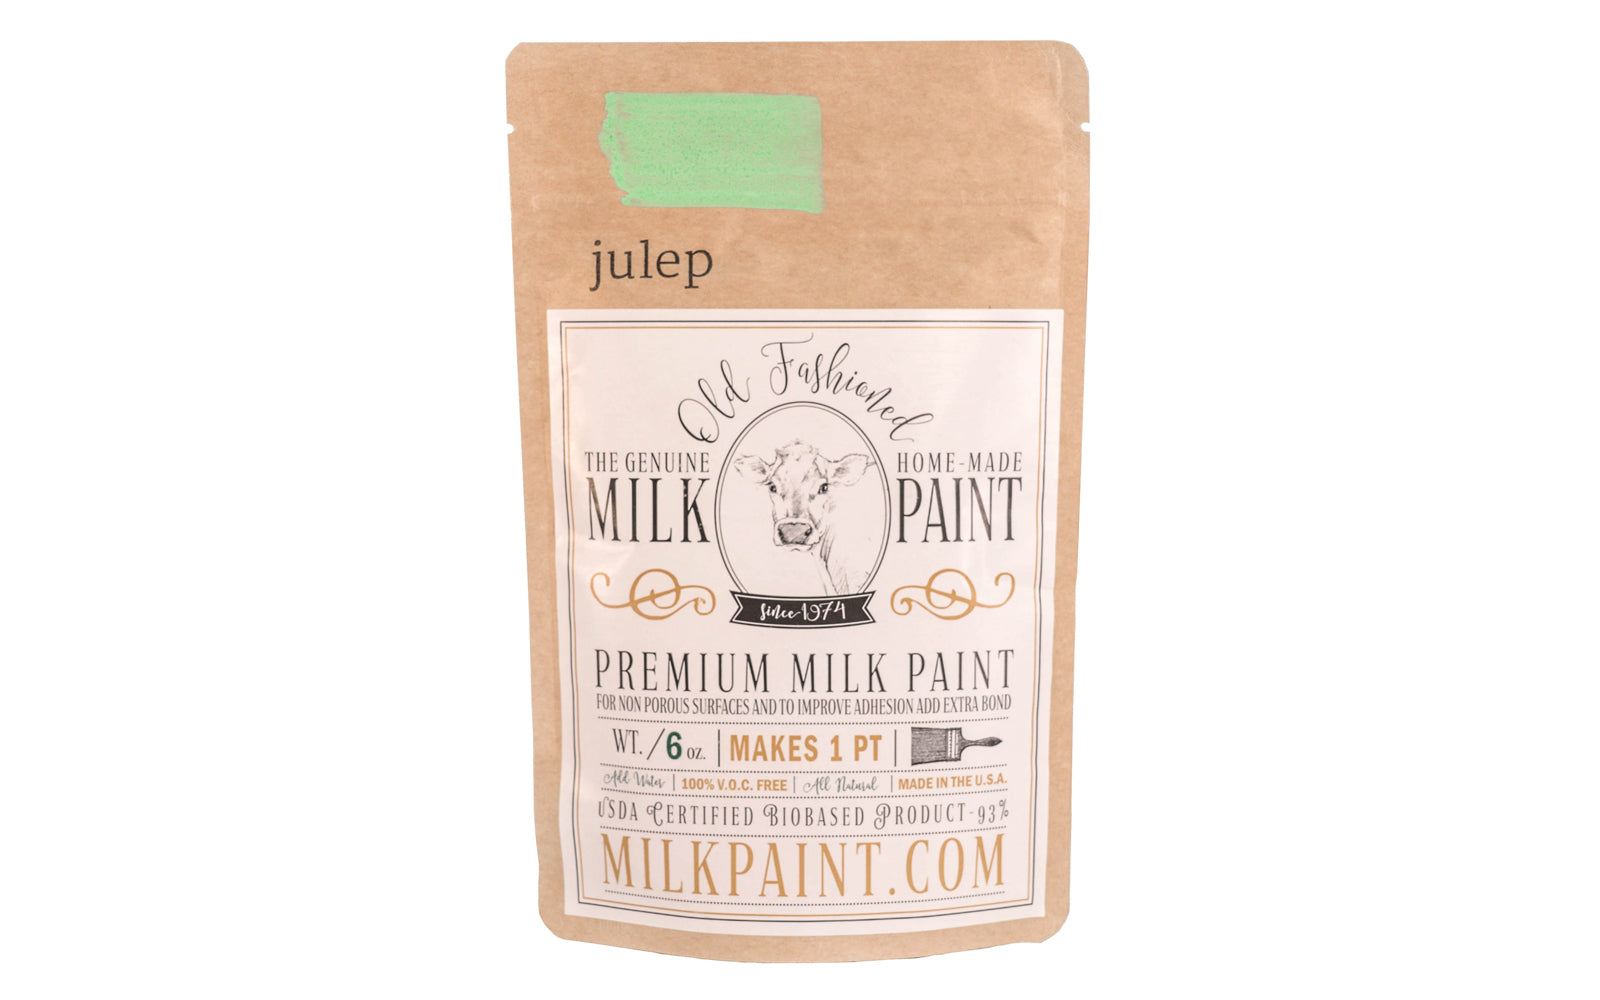 This Milk Paint color is "Julep" - Bright light green. Comes in a powder form, you can control how thick/thin you mix the paint. Use it as you would regular paint, thinner for a wash/stain or thicker to create texture. Environmentally safe, non-toxic & is food safe. 100% VOC free. Powder Paint